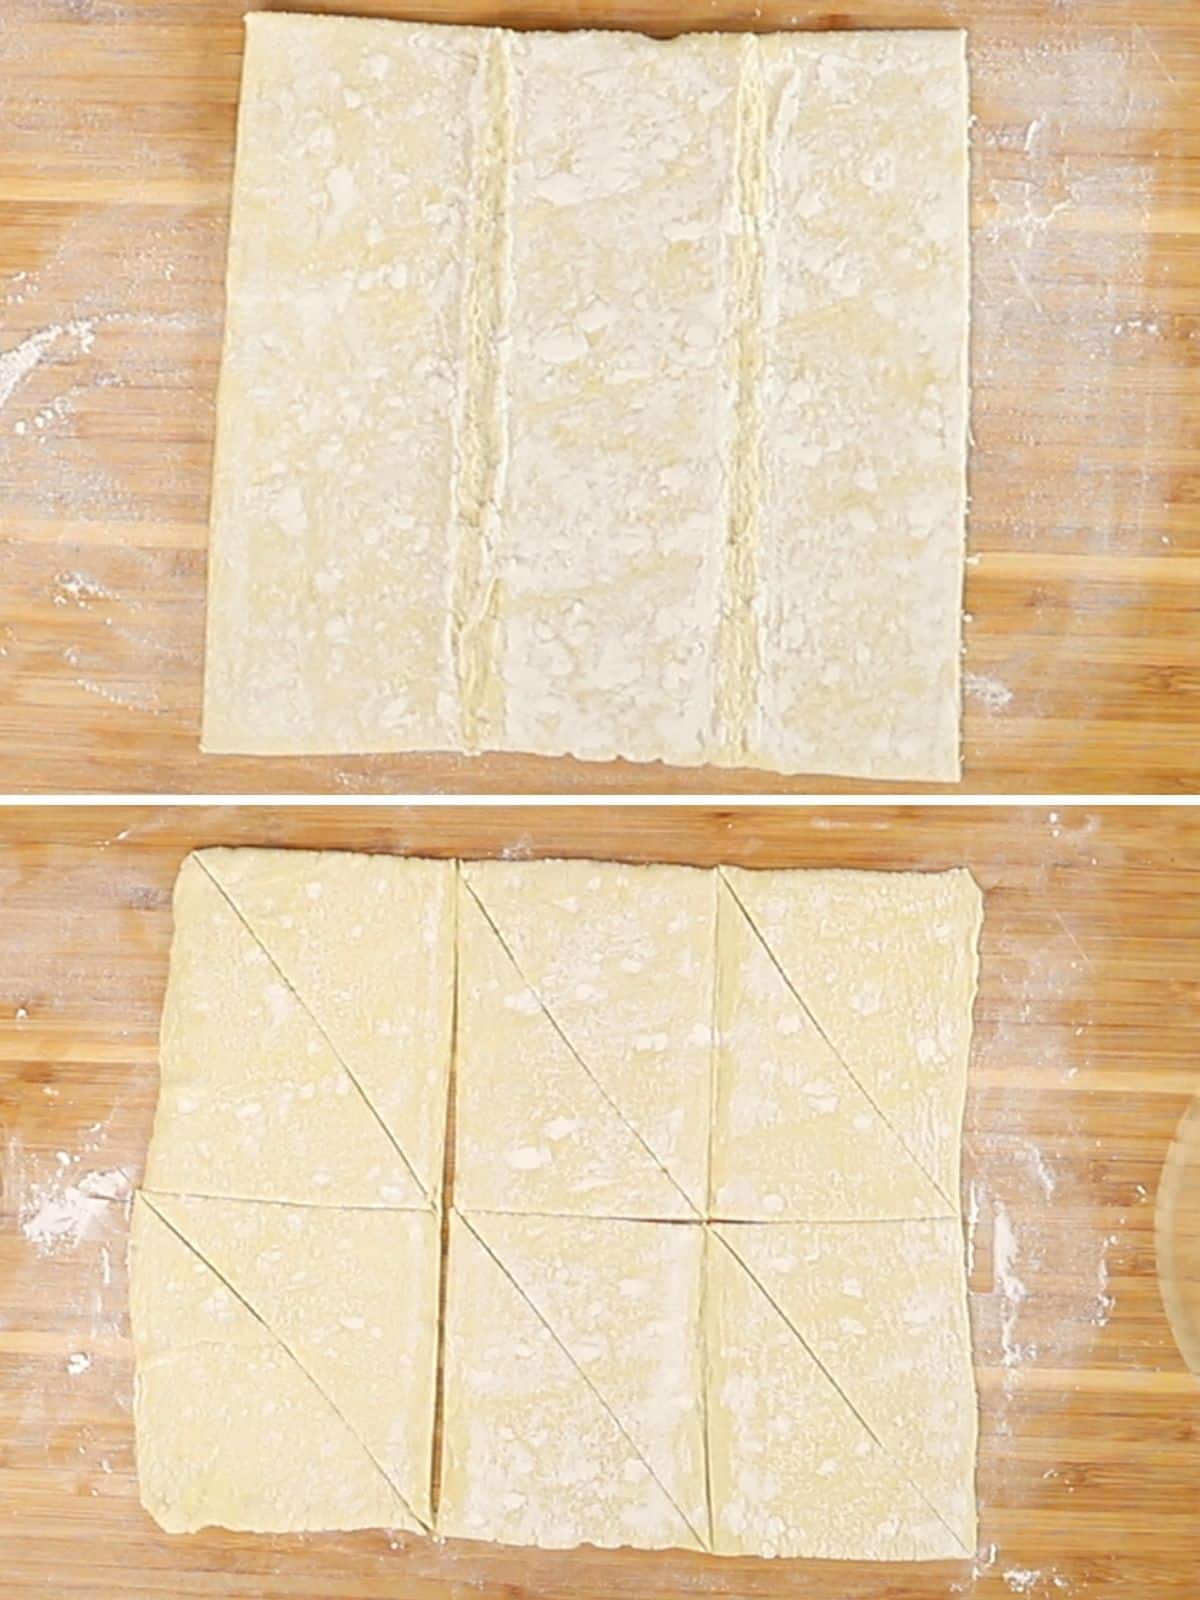 A collage of two images showing how to roll and cut puff pastry sheet.